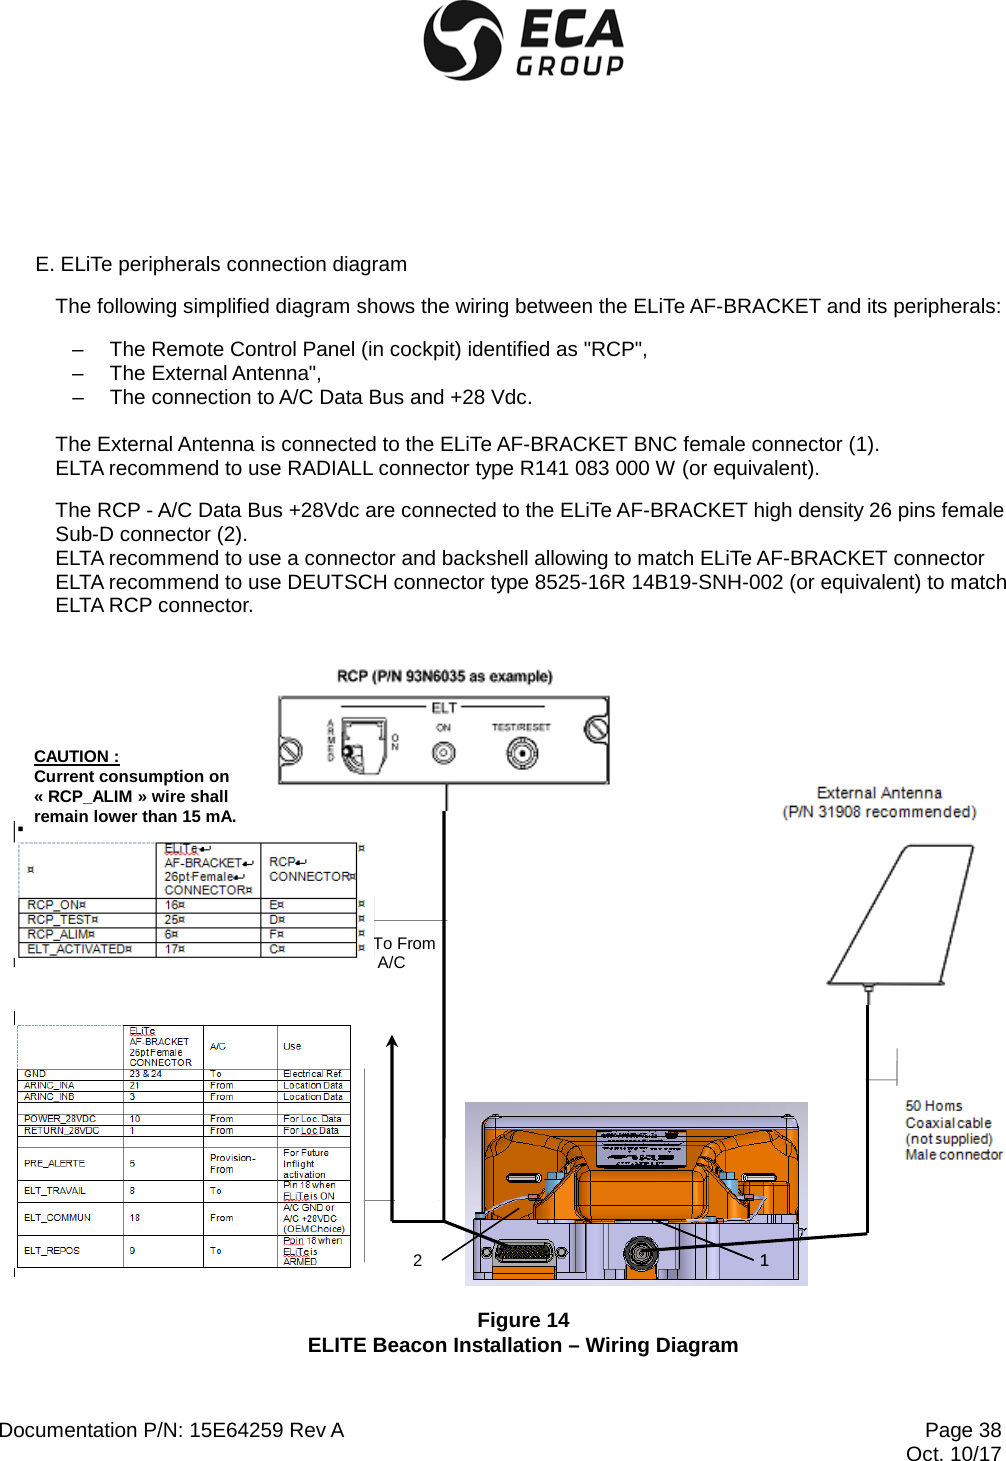  Documentation P/N: 15E64259 Rev A Page 38  Oct. 10/17  E. ELiTe peripherals connection diagram The following simplified diagram shows the wiring between the ELiTe AF-BRACKET and its peripherals: –  The Remote Control Panel (in cockpit) identified as &quot;RCP&quot;, –  The External Antenna&quot;, –  The connection to A/C Data Bus and +28 Vdc.  The External Antenna is connected to the ELiTe AF-BRACKET BNC female connector (1).  ELTA recommend to use RADIALL connector type R141 083 000 W (or equivalent). The RCP - A/C Data Bus +28Vdc are connected to the ELiTe AF-BRACKET high density 26 pins female Sub-D connector (2). ELTA recommend to use a connector and backshell allowing to match ELiTe AF-BRACKET connector  ELTA recommend to use DEUTSCH connector type 8525-16R 14B19-SNH-002 (or equivalent) to match ELTA RCP connector.         To From  A/C        Figure 14 ELITE Beacon Installation – Wiring Diagram  1 1 2 CAUTION : Current consumption on « RCP_ALIM » wire shall remain lower than 15 mA. 